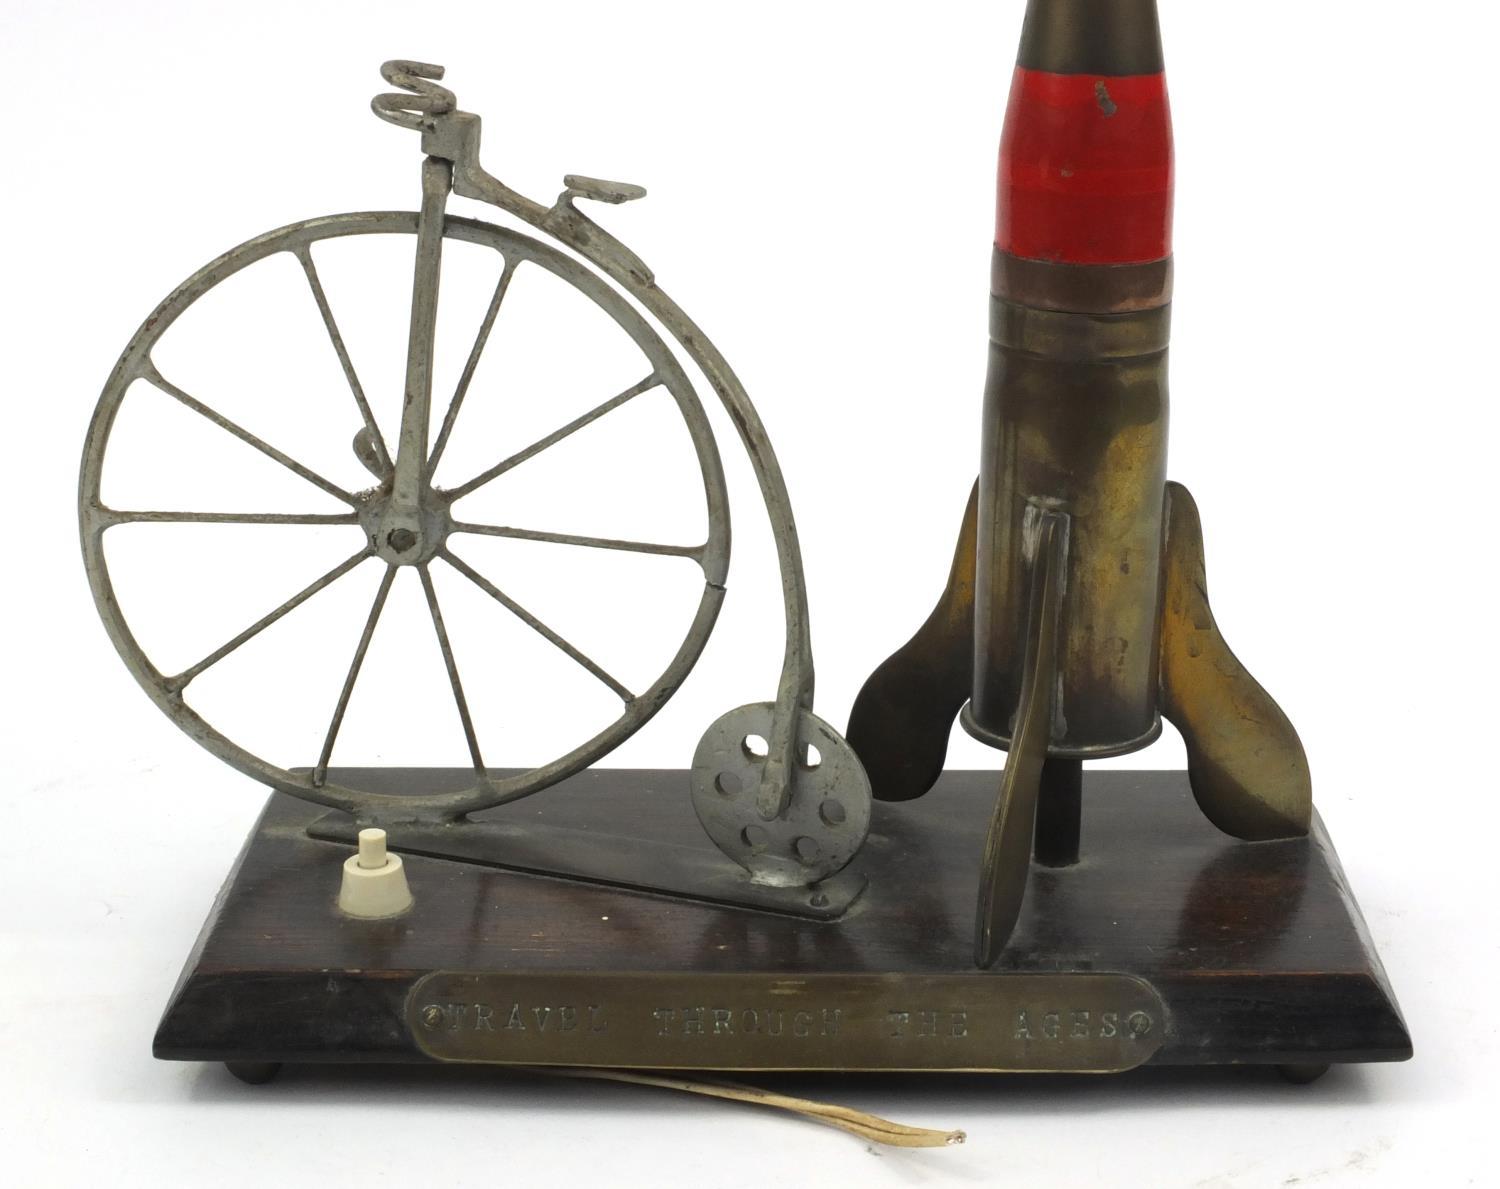 Military interest trench art table light titled 'Travel Through The Ages', raised on an oak base, - Image 4 of 11